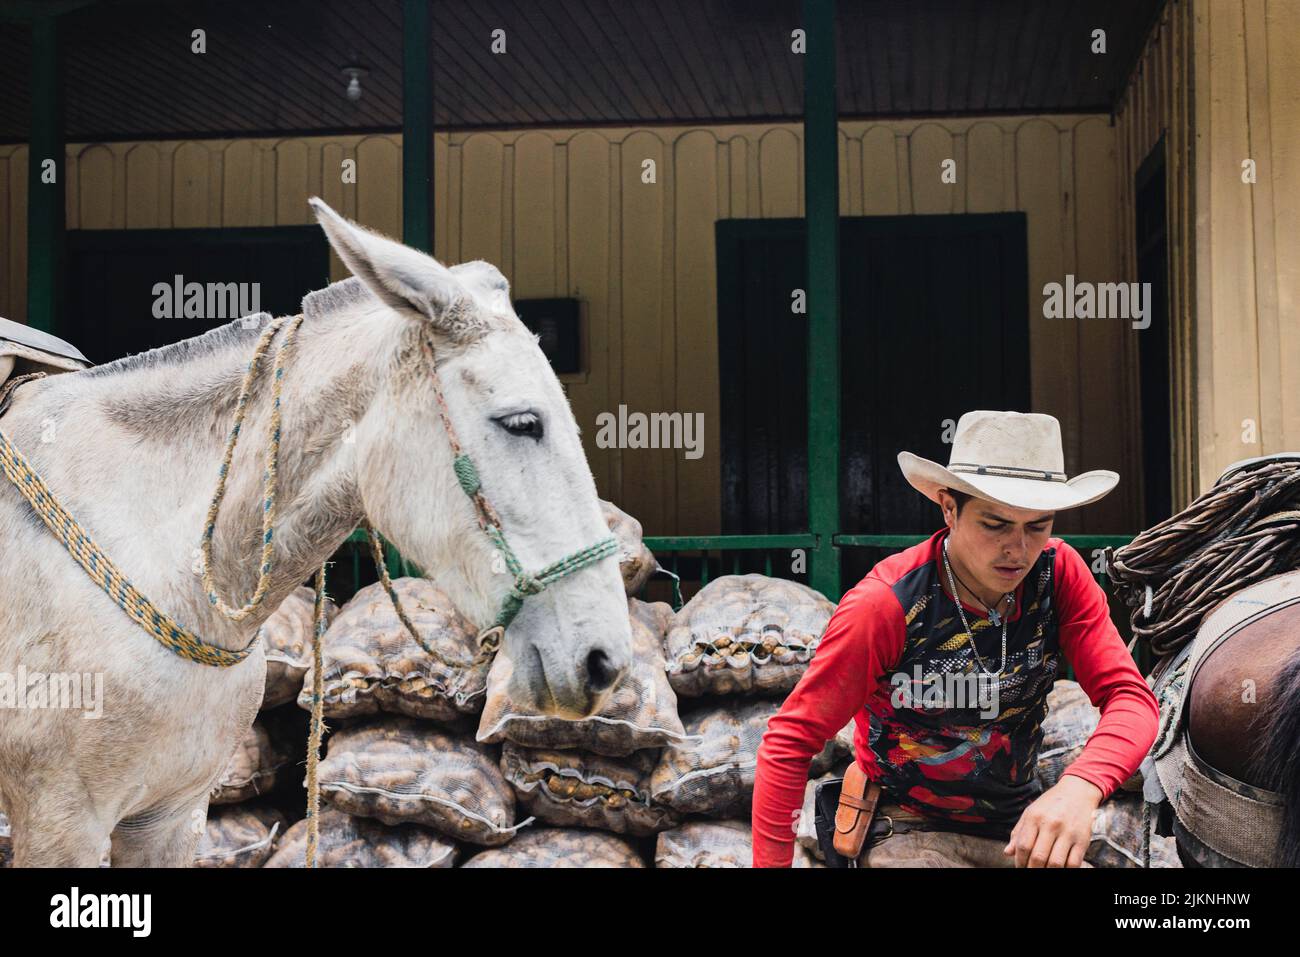 A person in cowboy style sitting next to a white horse in a barn Stock Photo